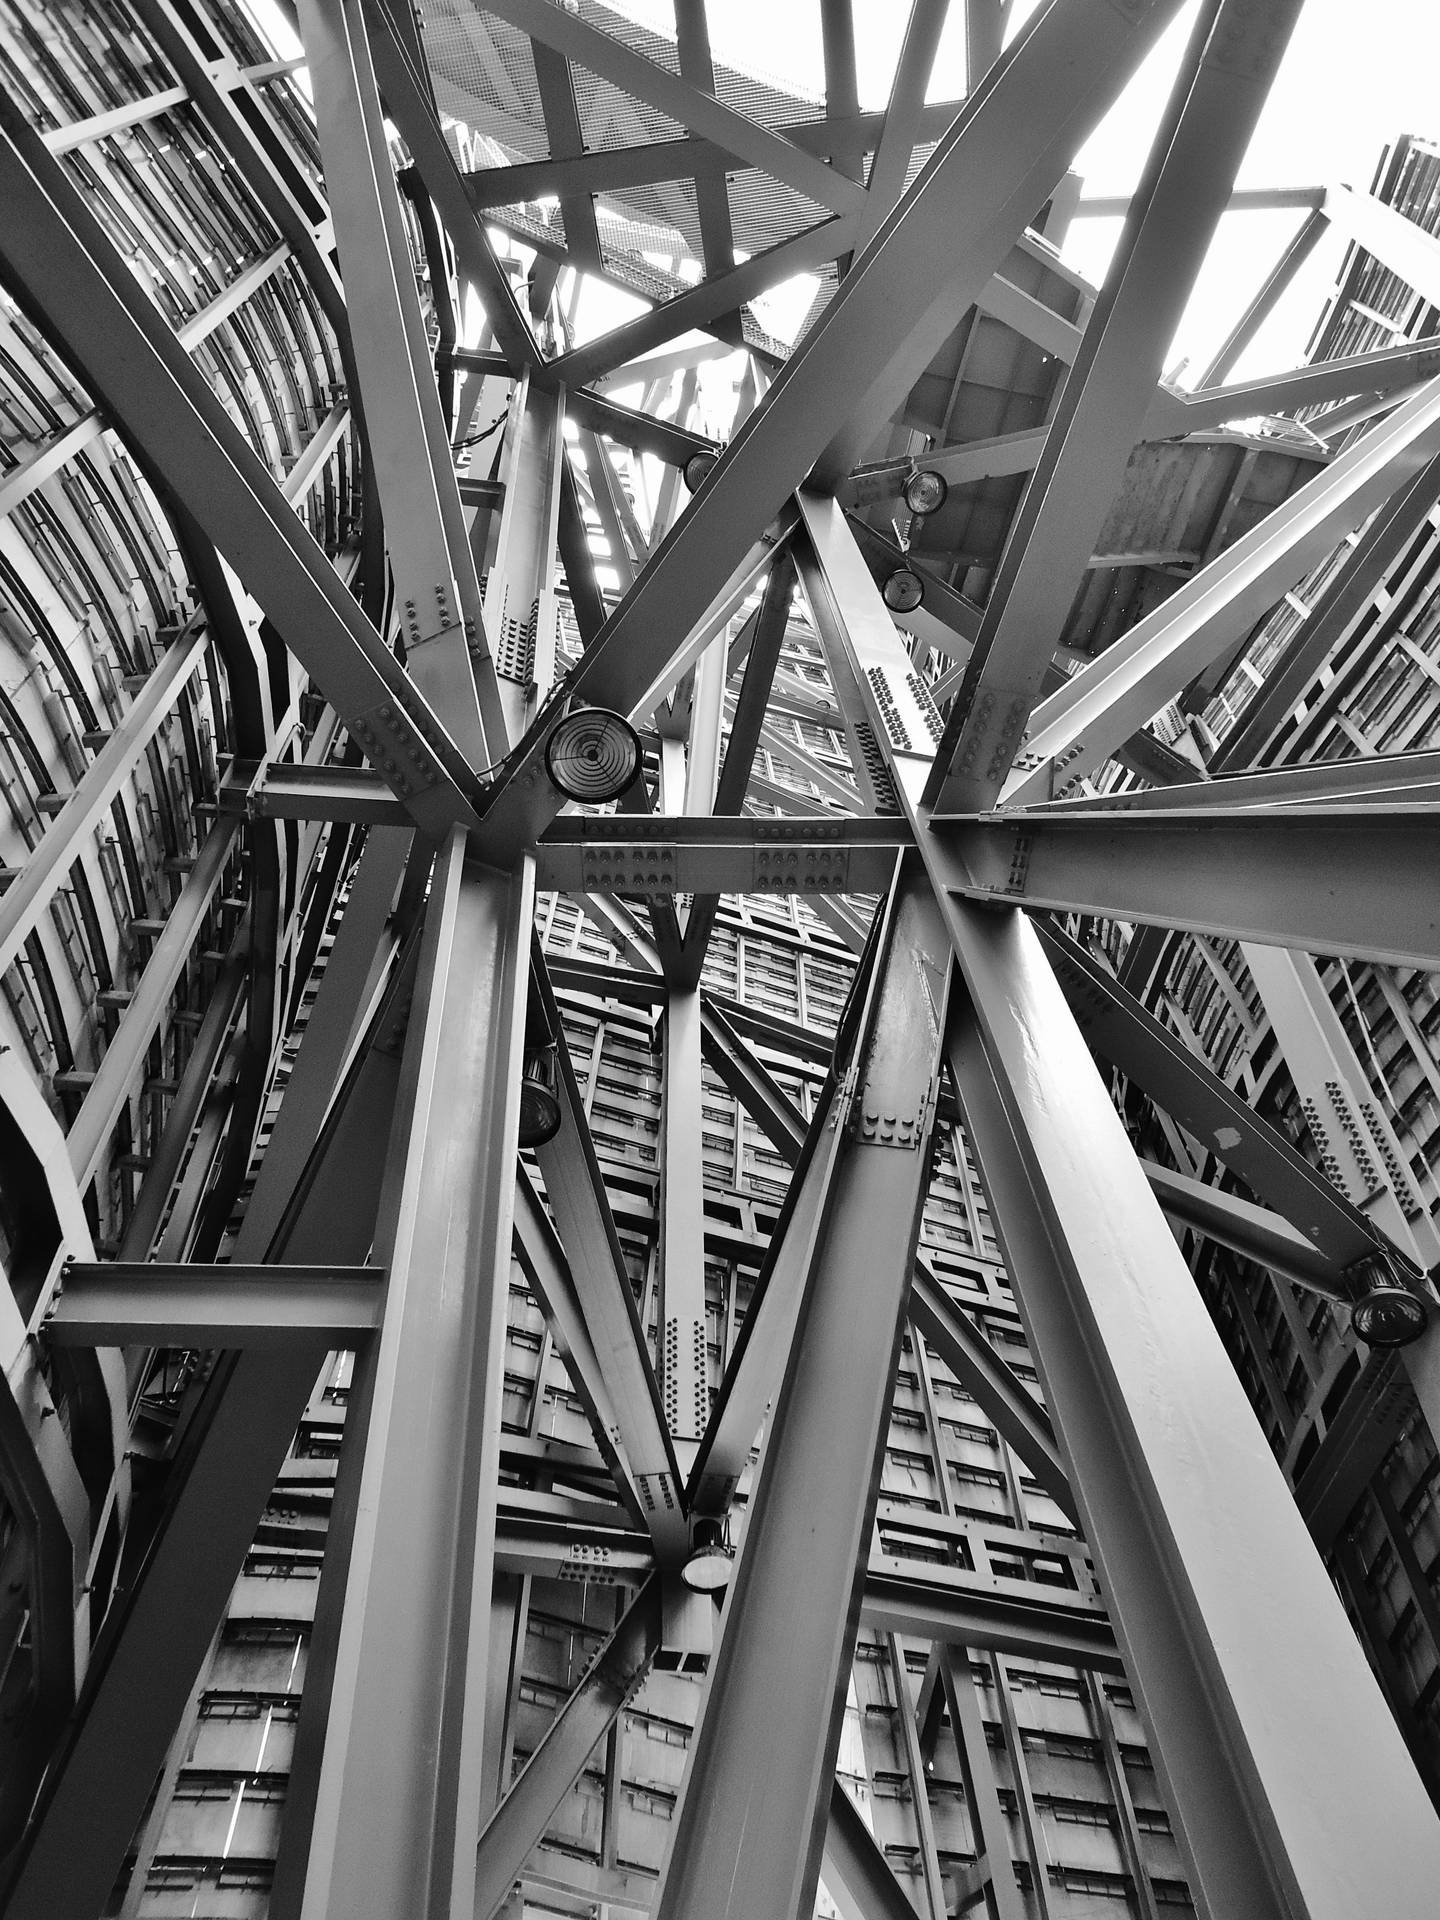 Structural Streel Made Of Iron Picture